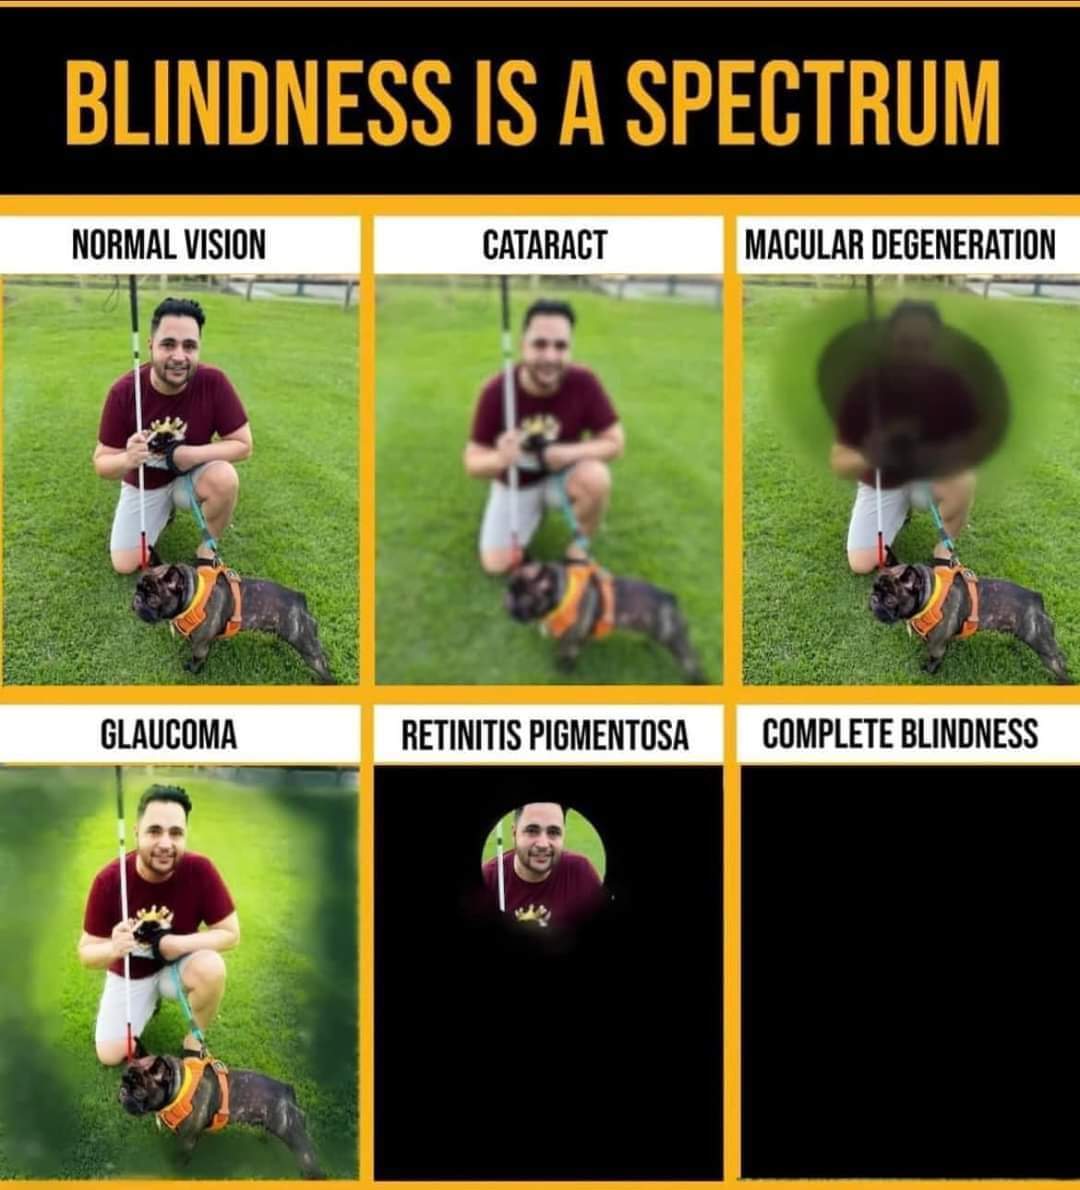 Blindness is definitely different for everyone and how they see the world.  As for me, it be like bottom left corner.  Crazy, eh?

#RPAwarenessMonth
#RetinitisPigmentosa
#UsherSyndrome
#BlindnessIsASpectrum
💙💜